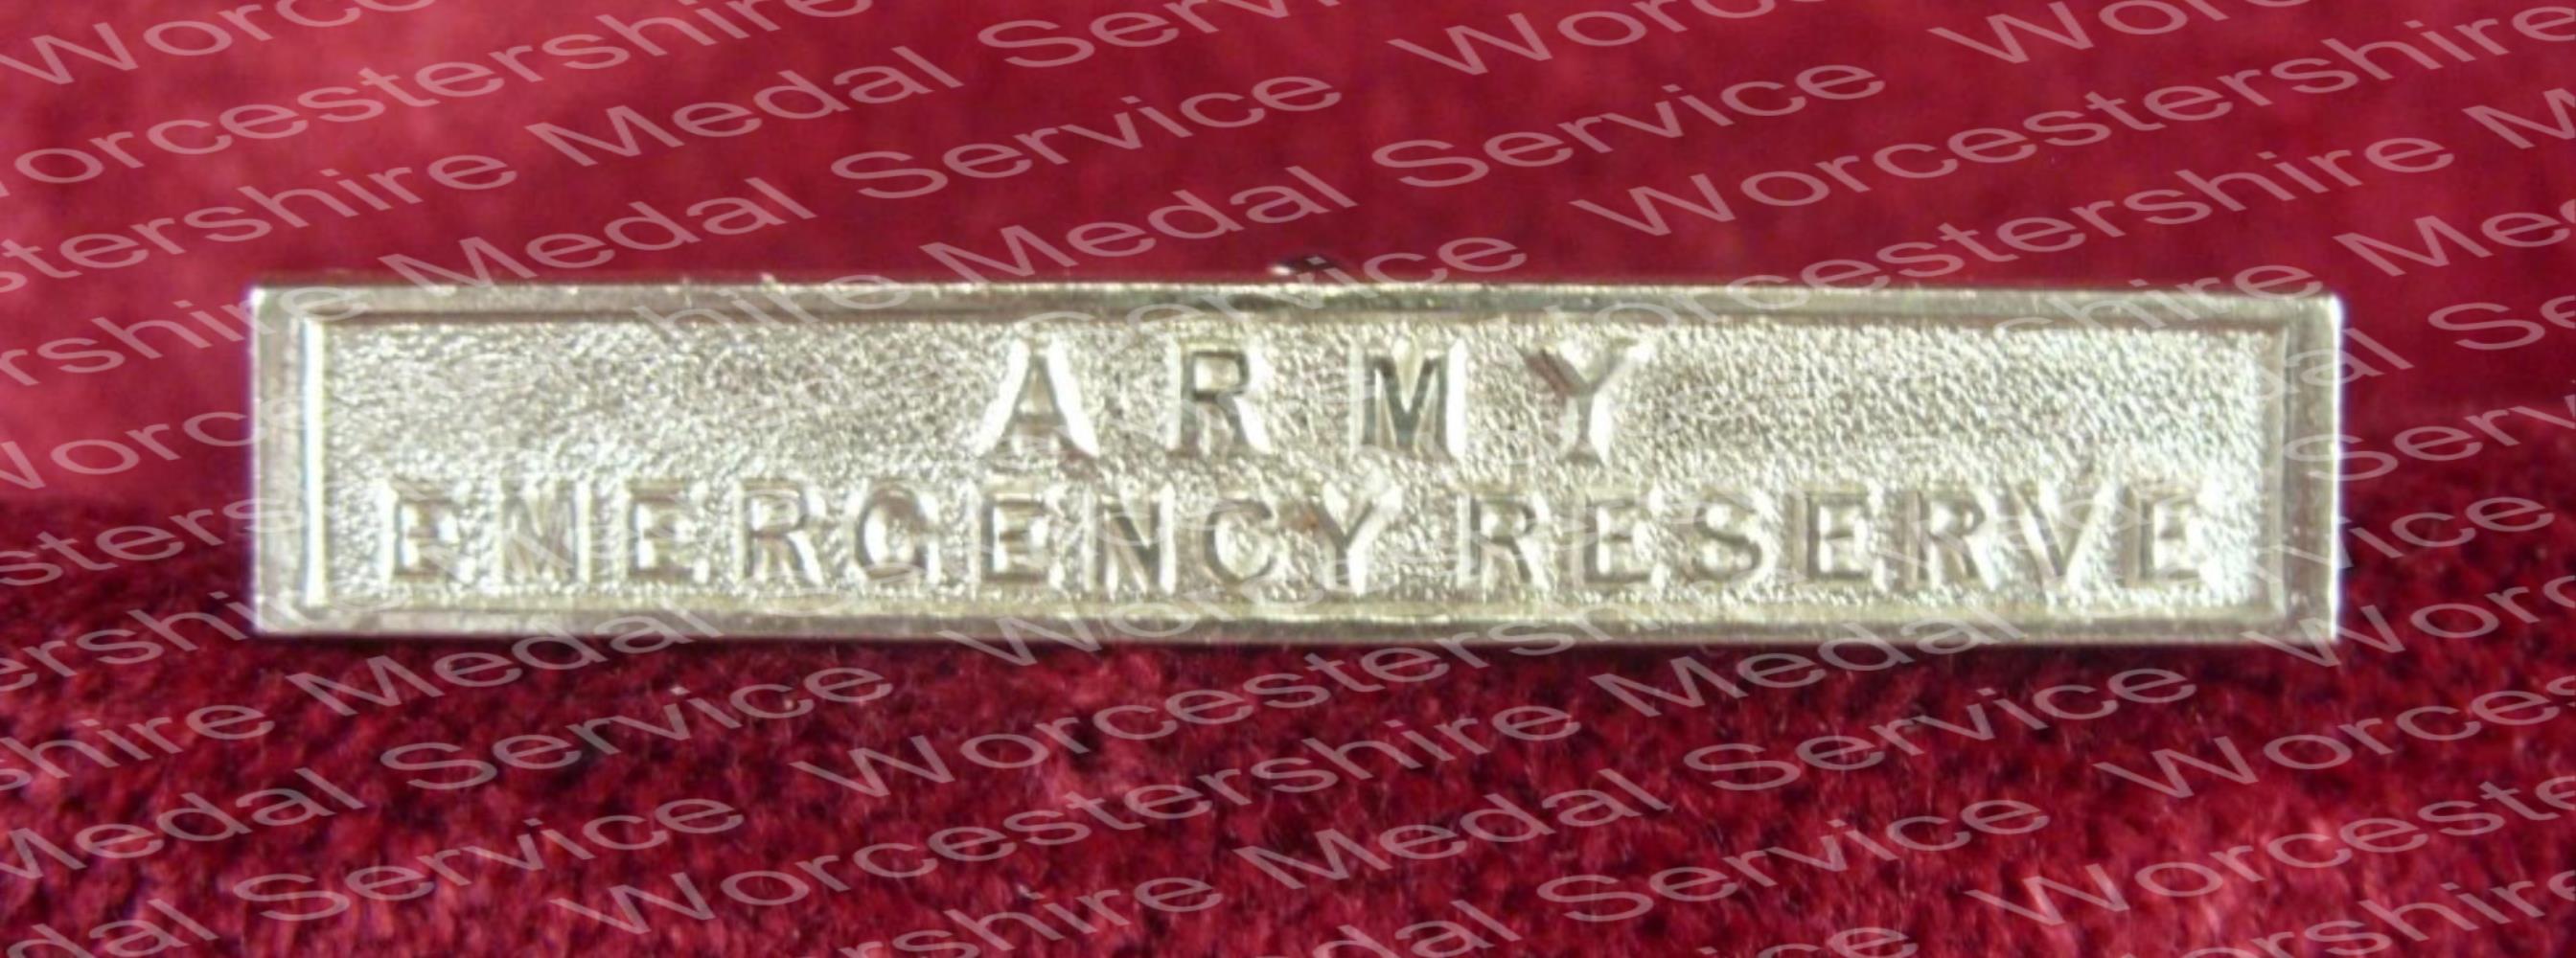 Worcestershire Medal Service: Army Emergency Reserve slip on top bar - Silver